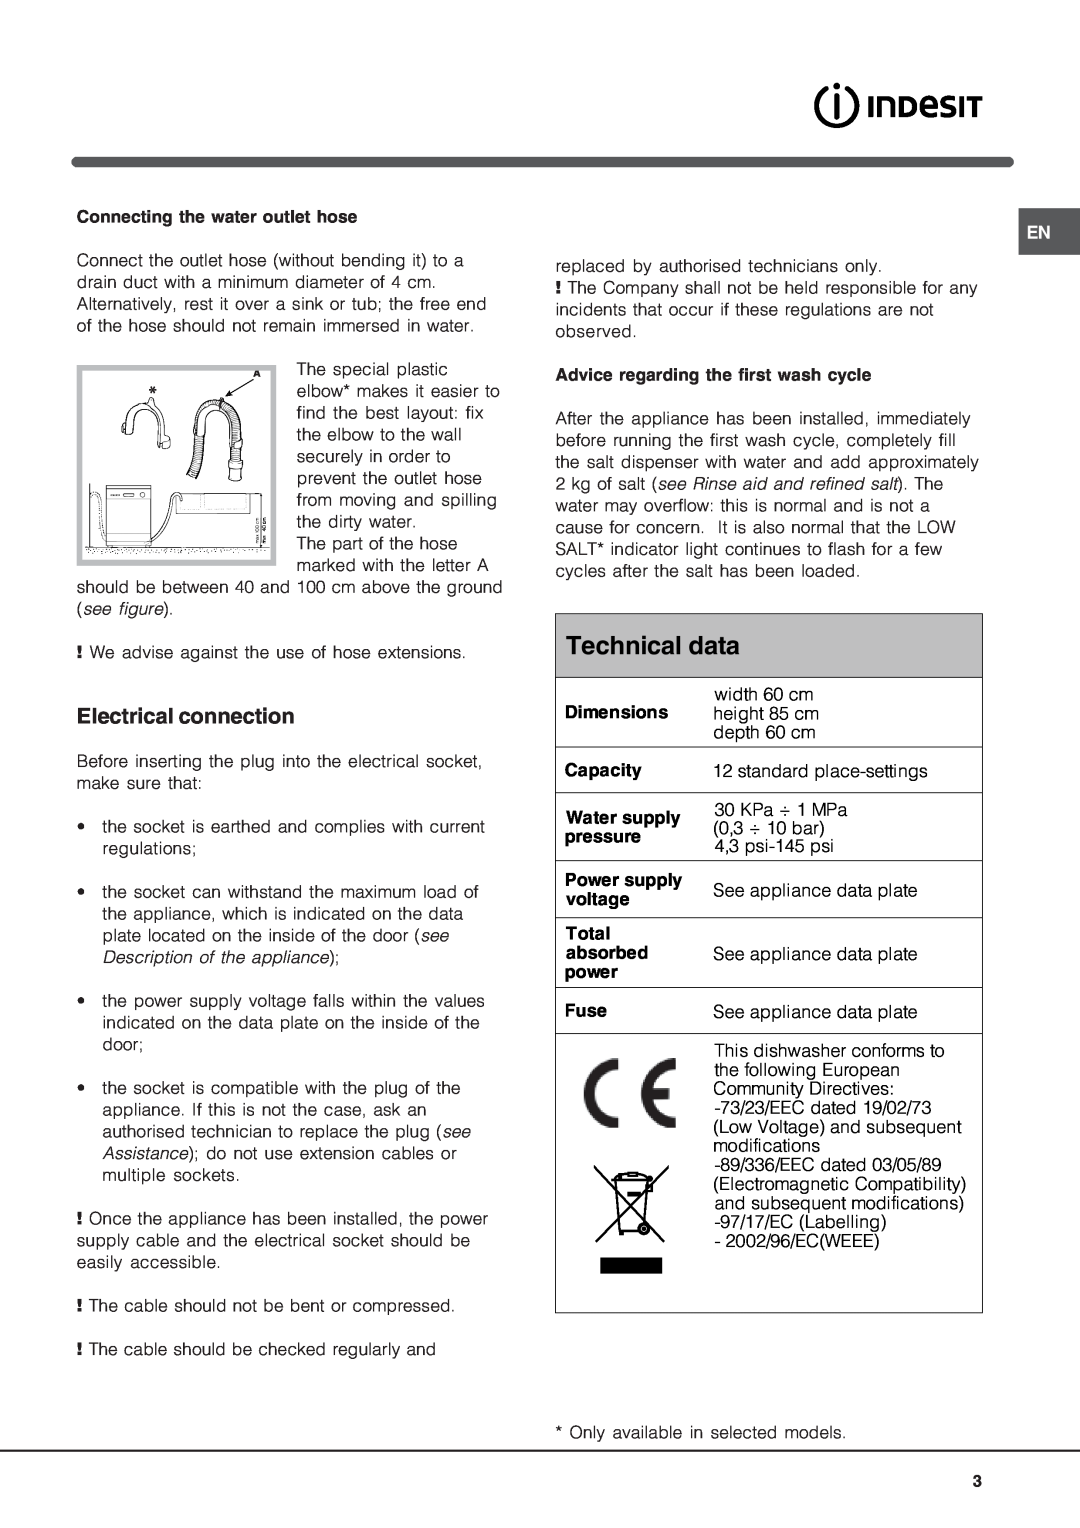 Indesit IDTM manual Technical data, Electrical connection 